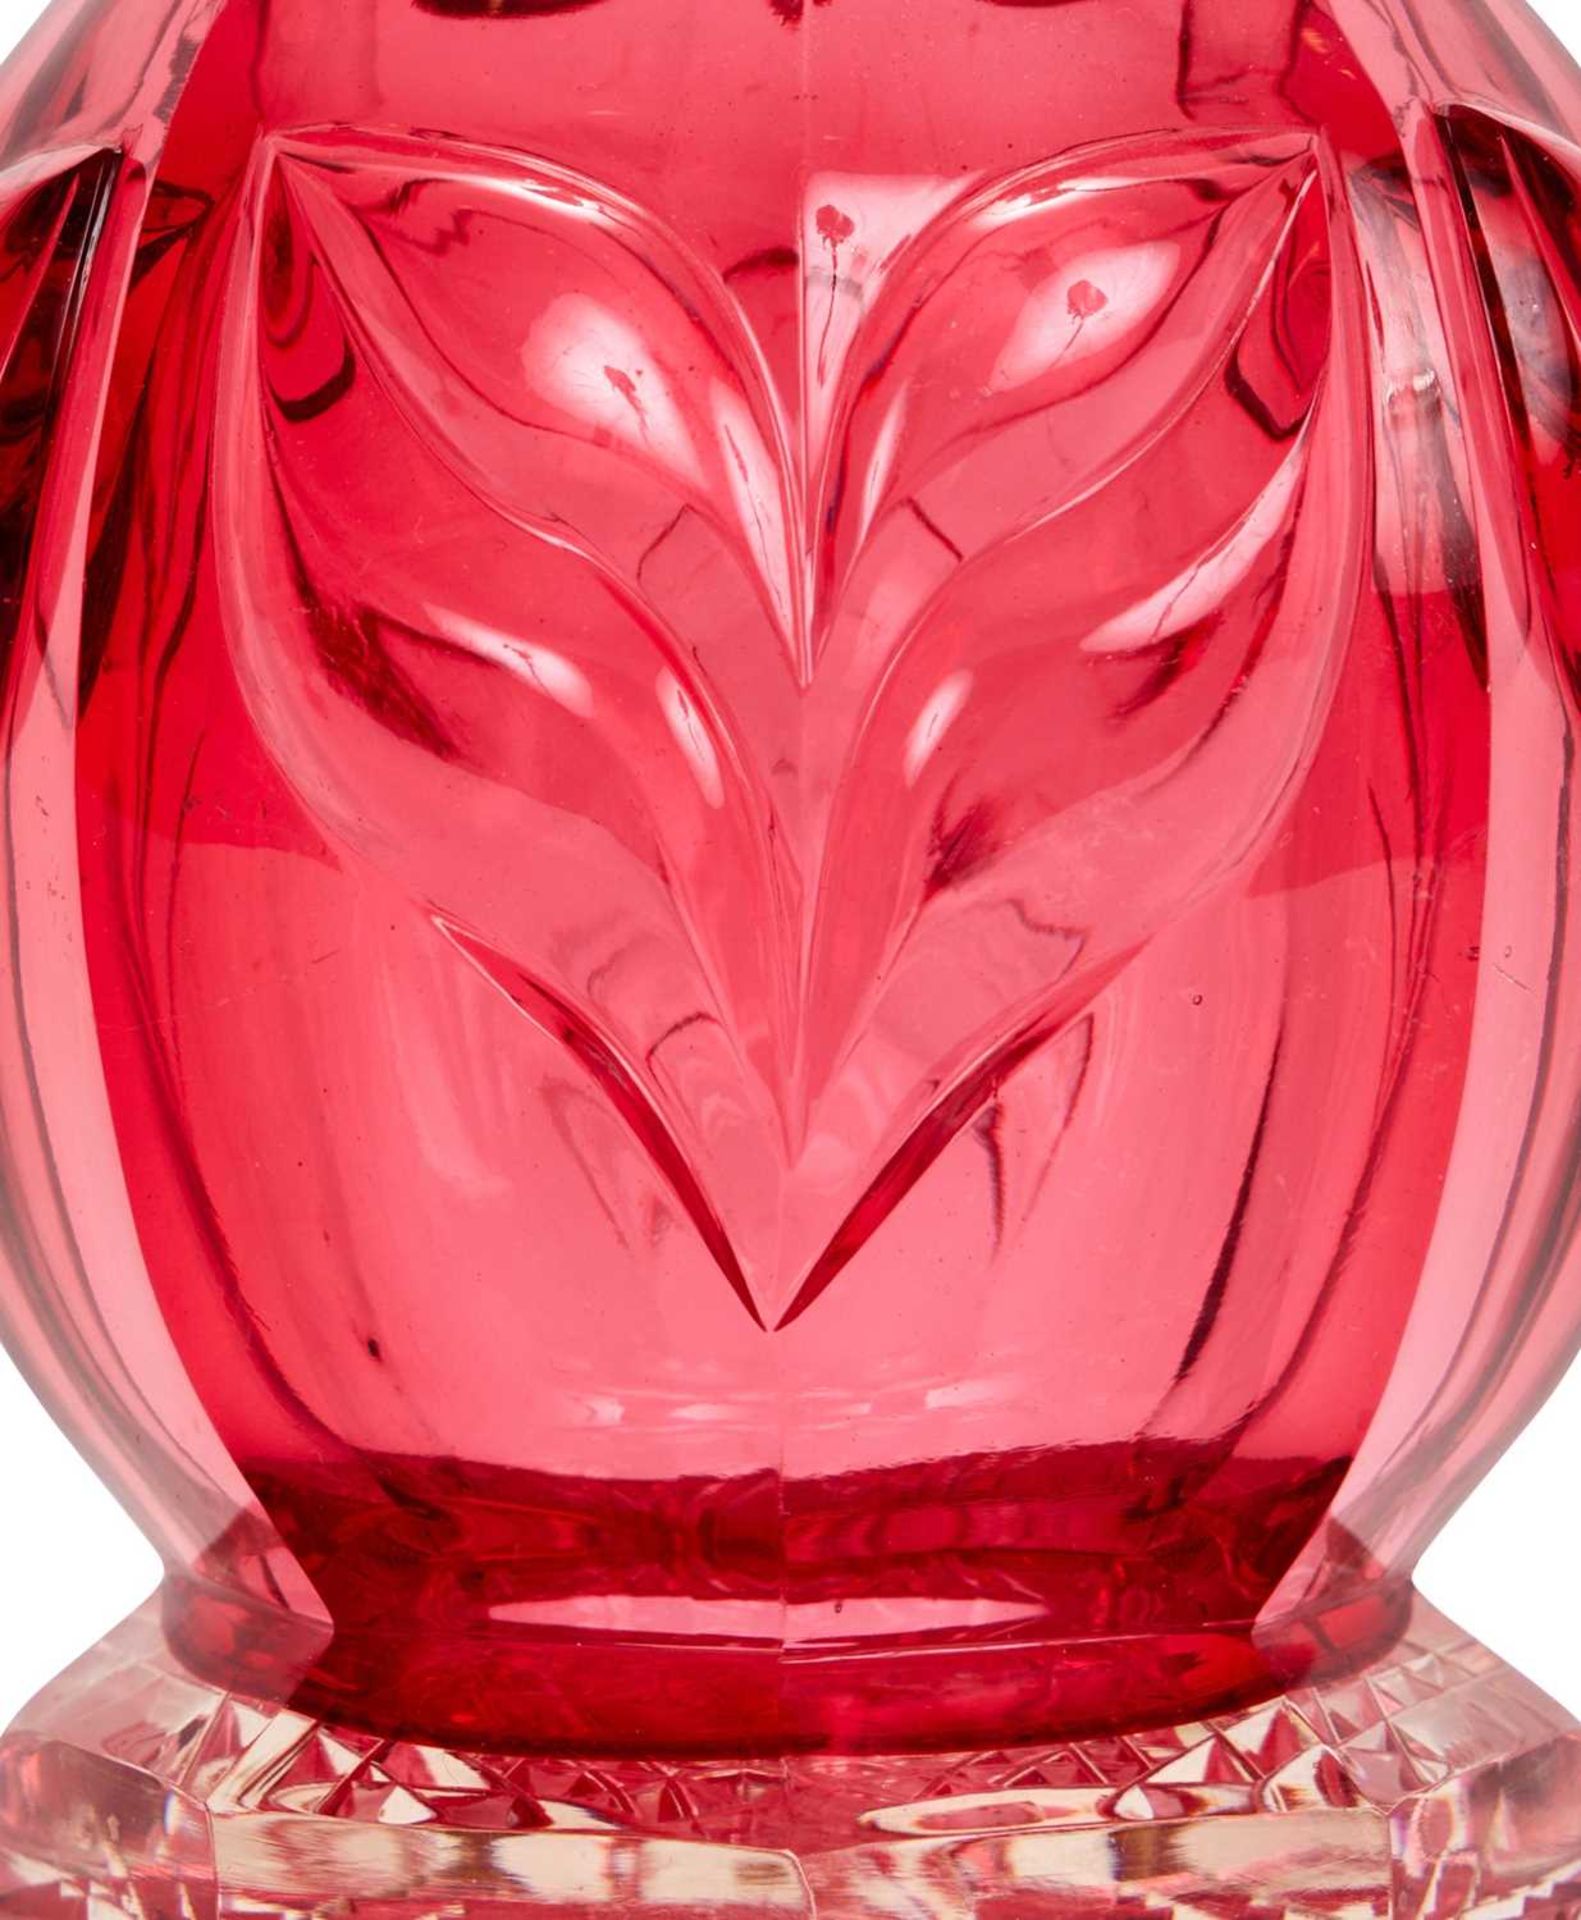 A LATE 19TH CENTURY RUBY CUT GLASS DECANTER ATTRIBUTED TO STEVENS AND WILLIAMS - Image 3 of 4